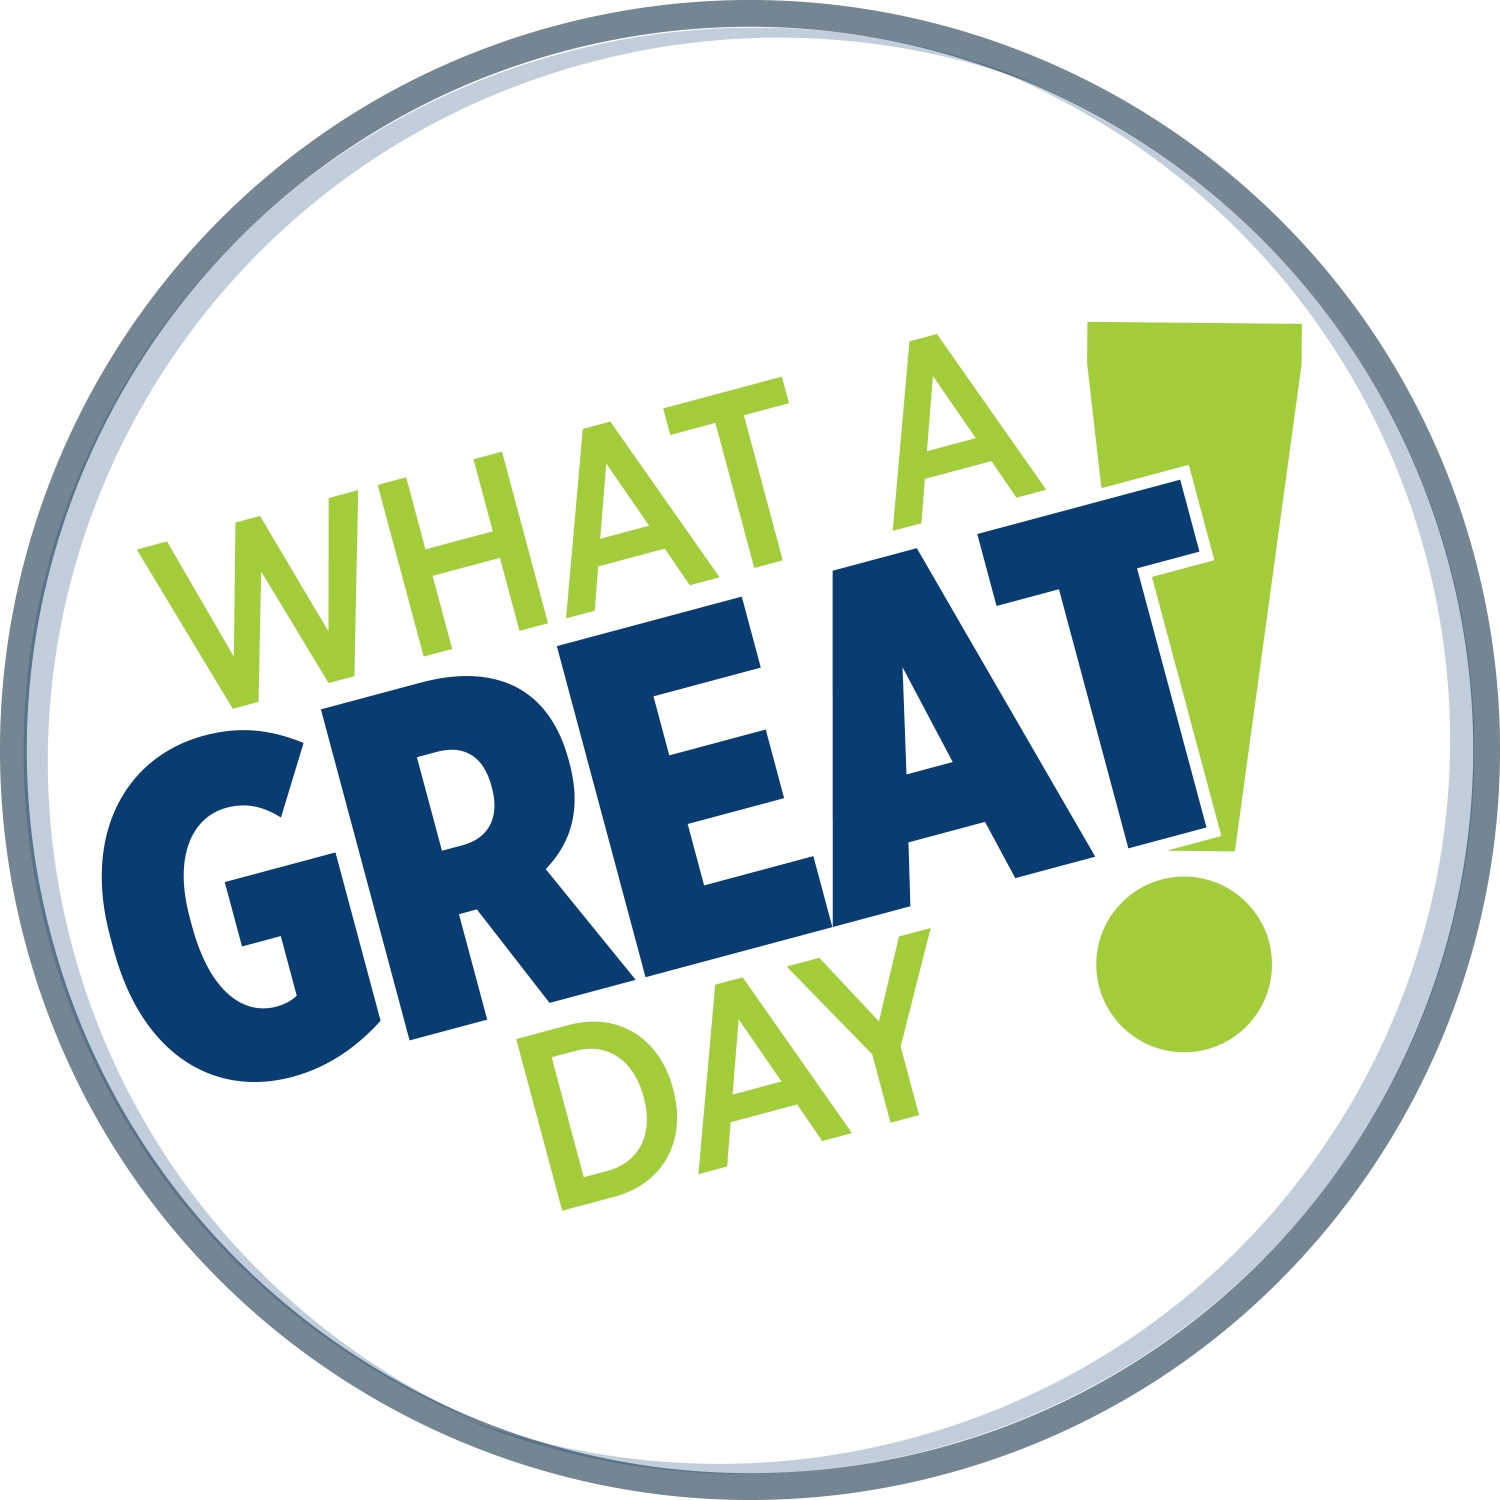 What a Great Day Logo.jpg